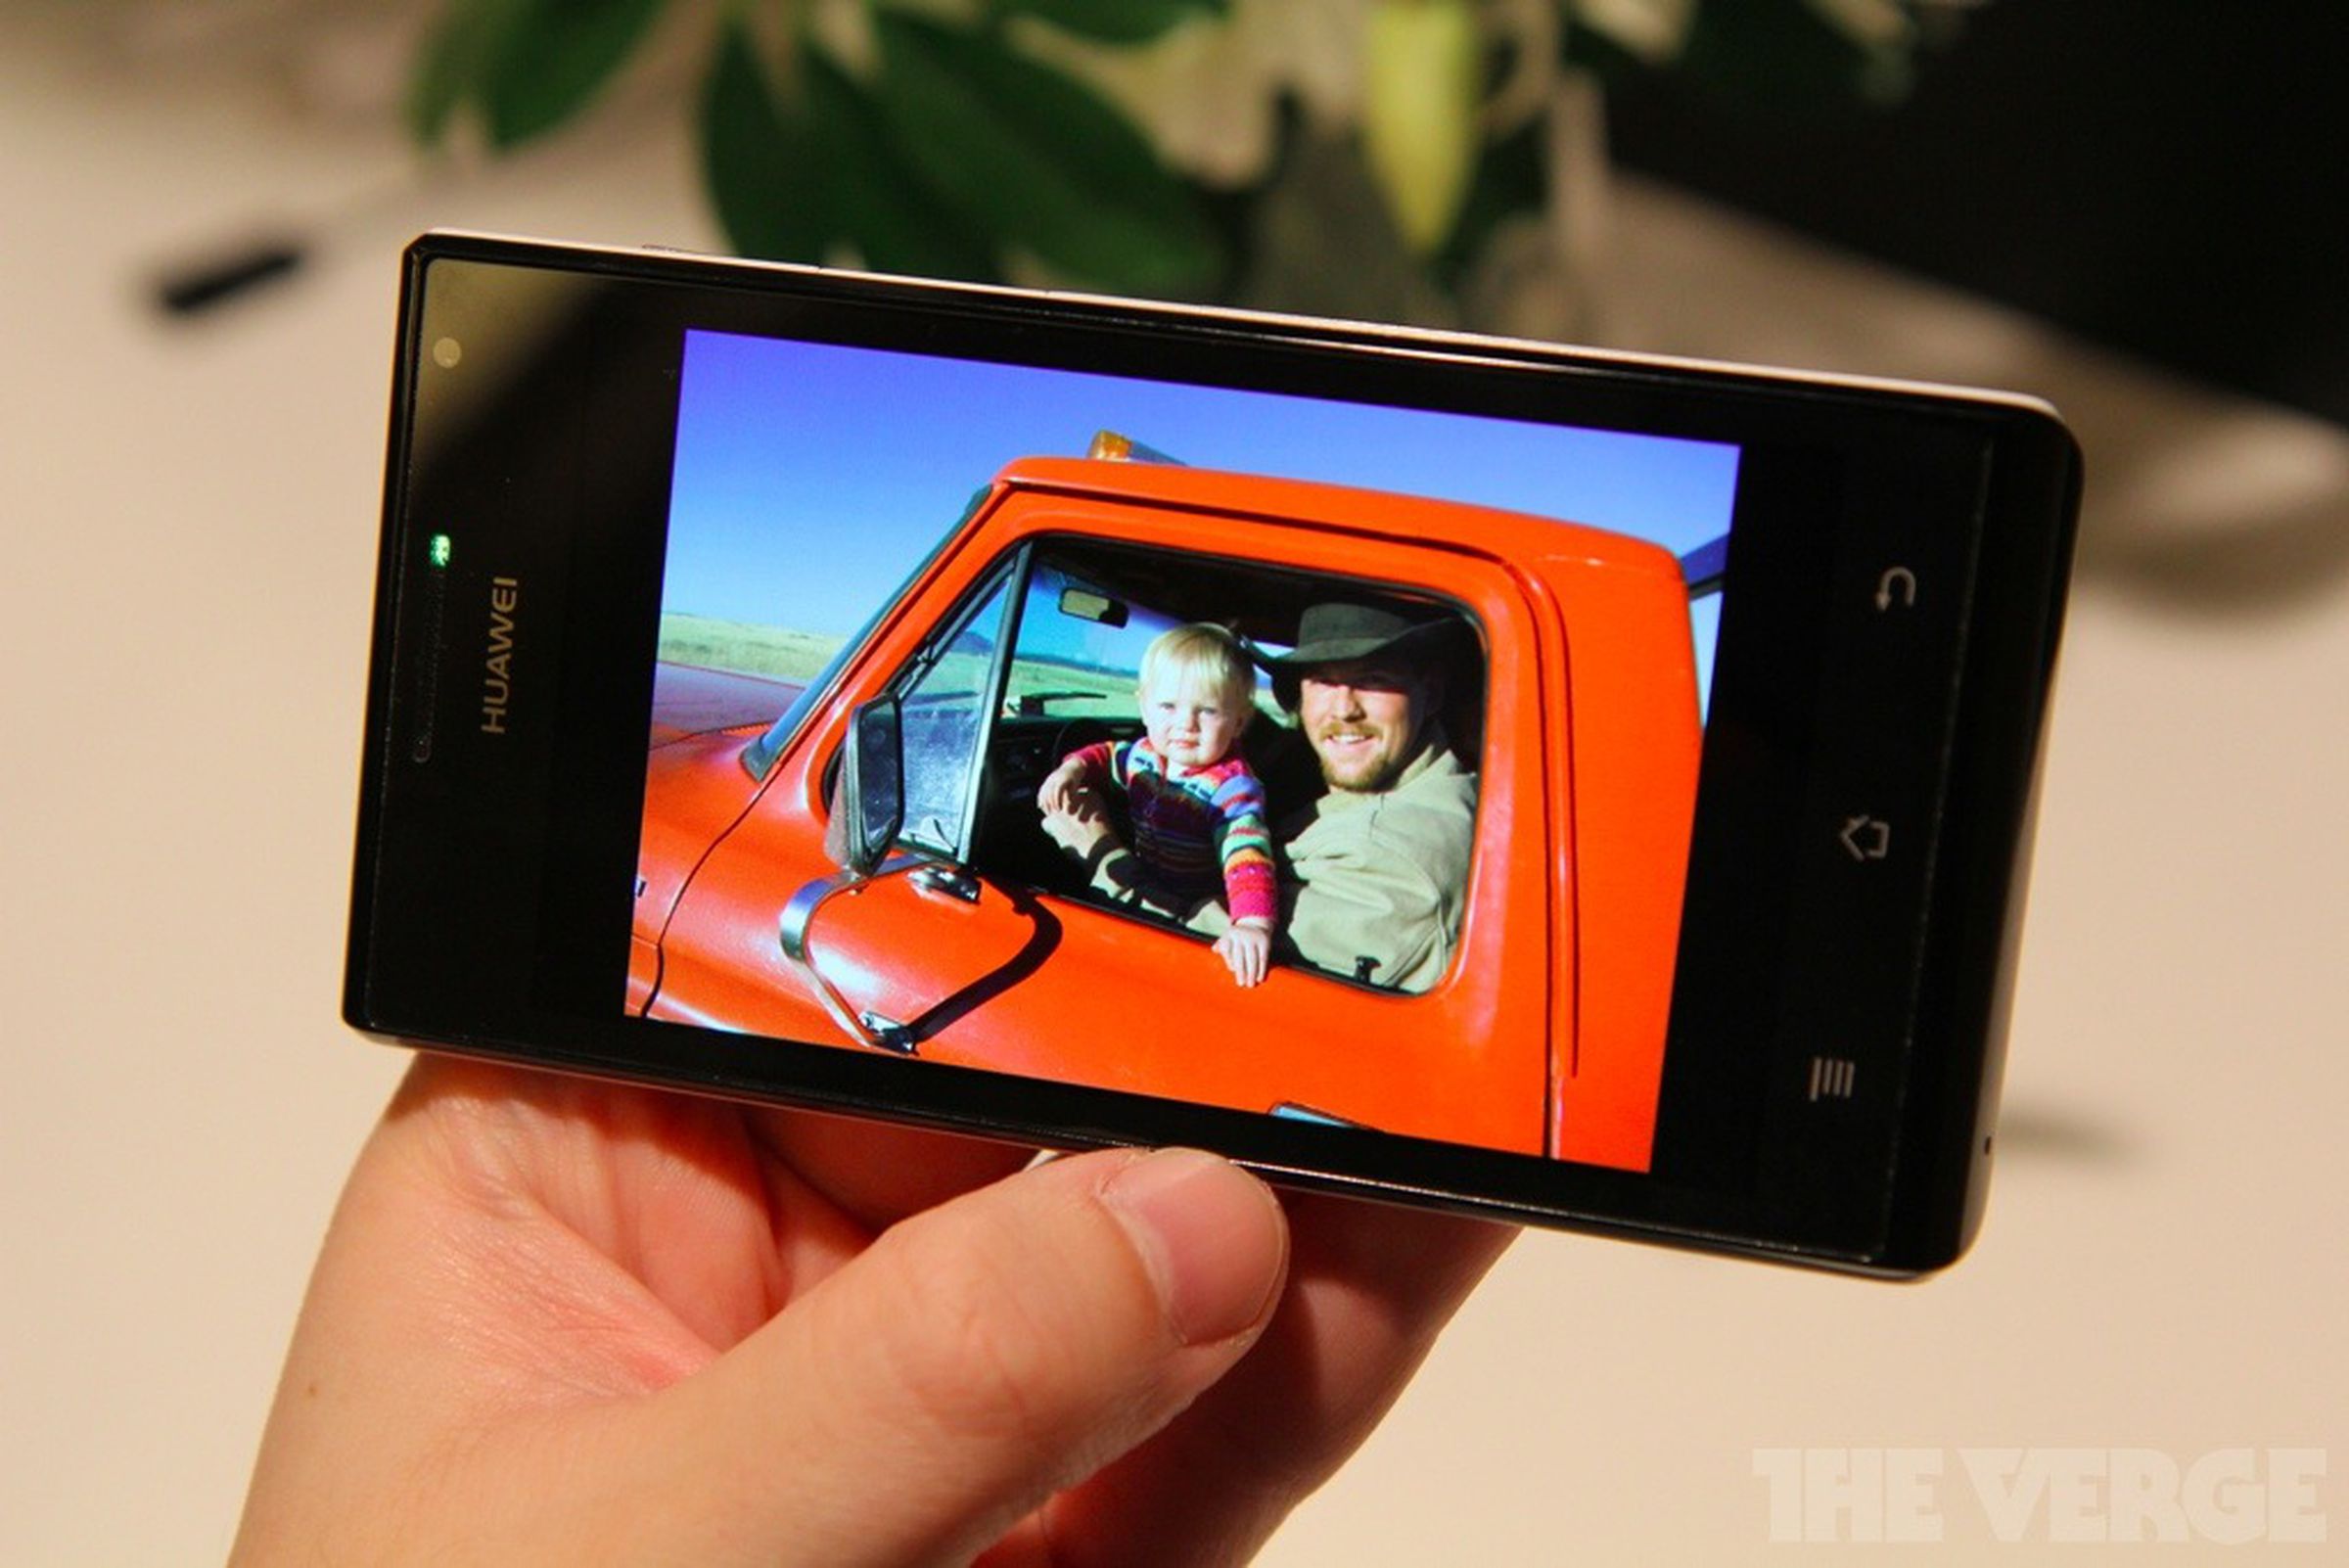 Huawei Ascend P1 / P1 S hands-on pictures